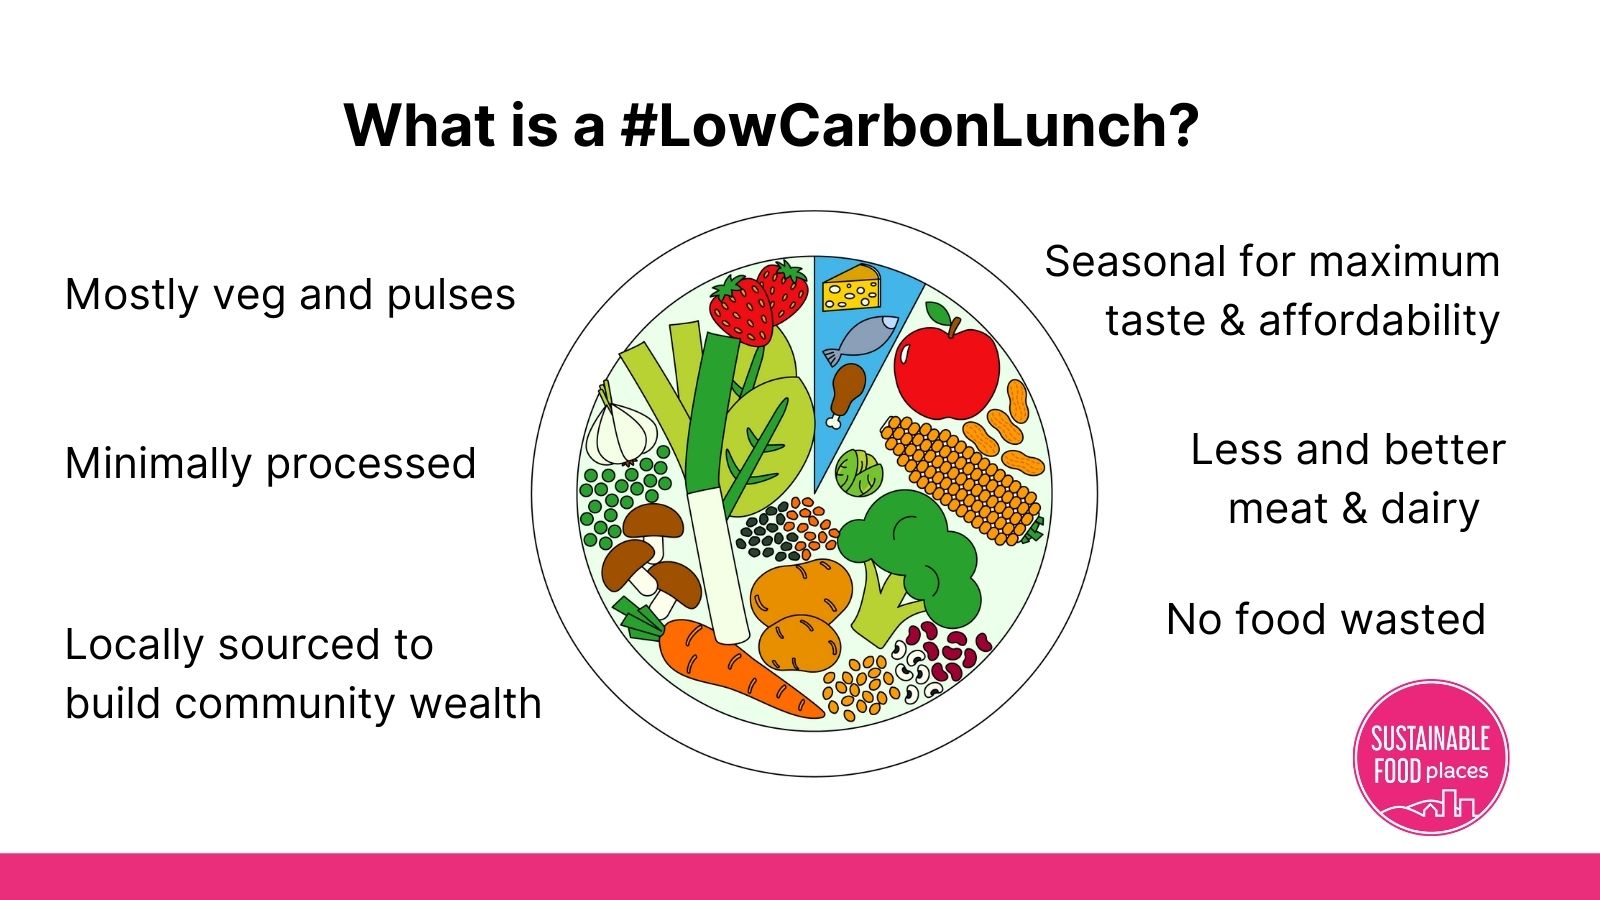 Join us on 29 Sep 21 for a #LowCarbonLunch